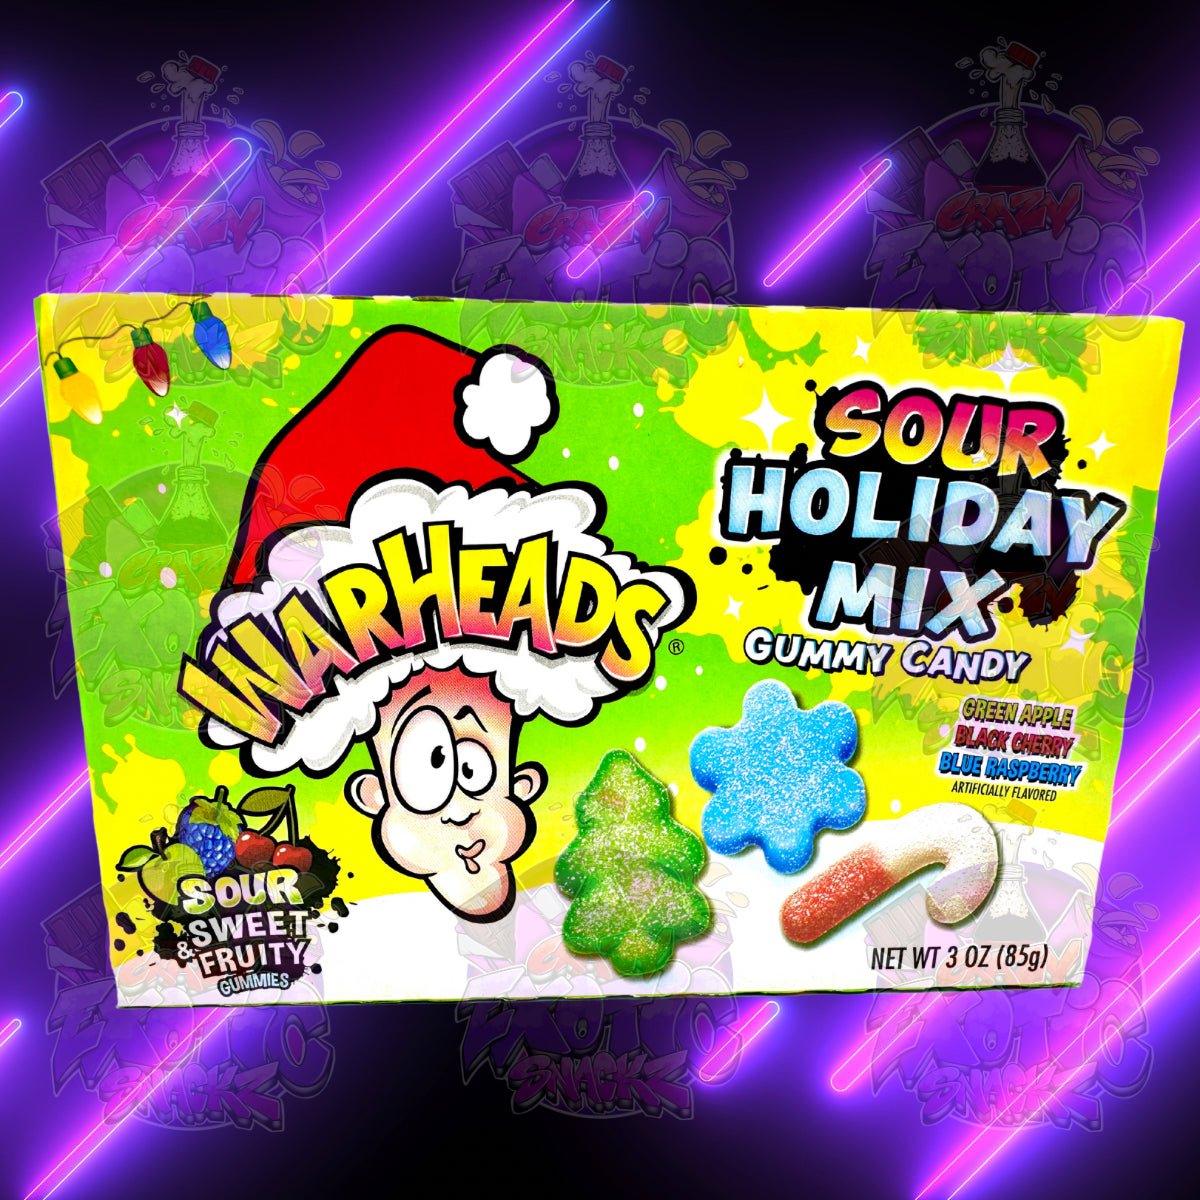 Warheads Sour Holiday Mix